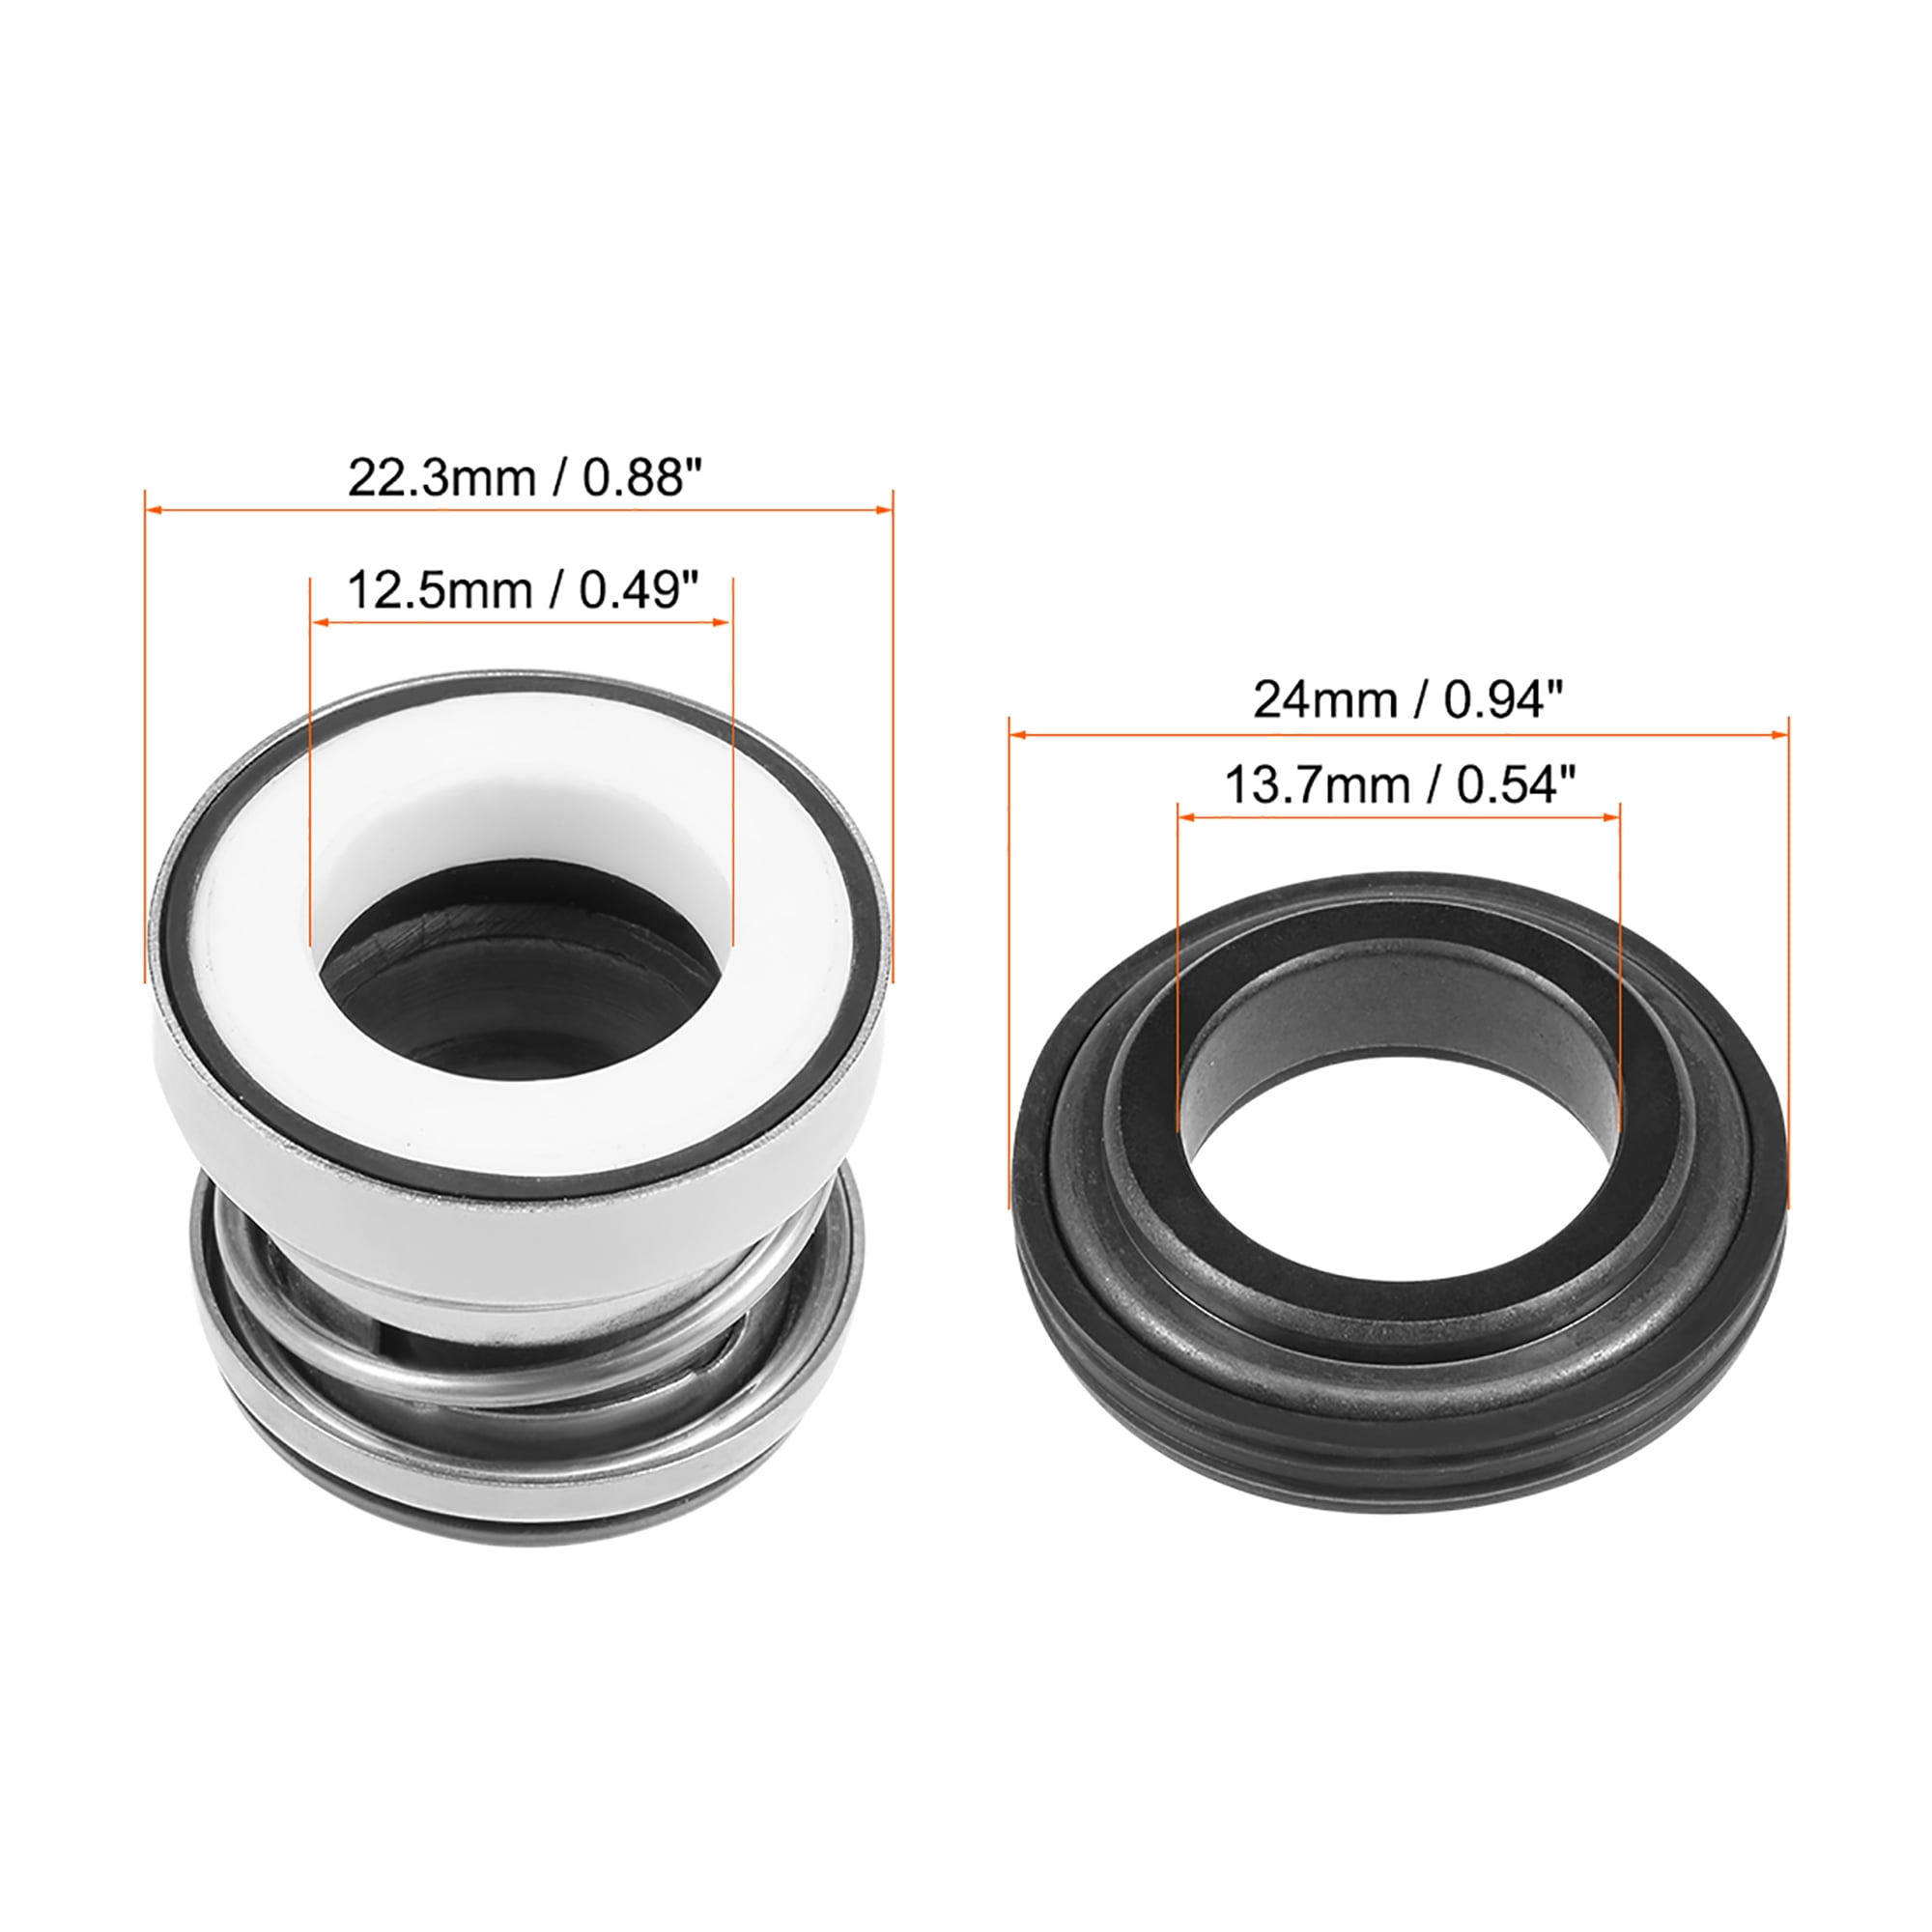 Details about   3pc 104/XJ 12-25mm Inner Dia Mechanical Shaft Seal Replacement for Pool Spa Pump 